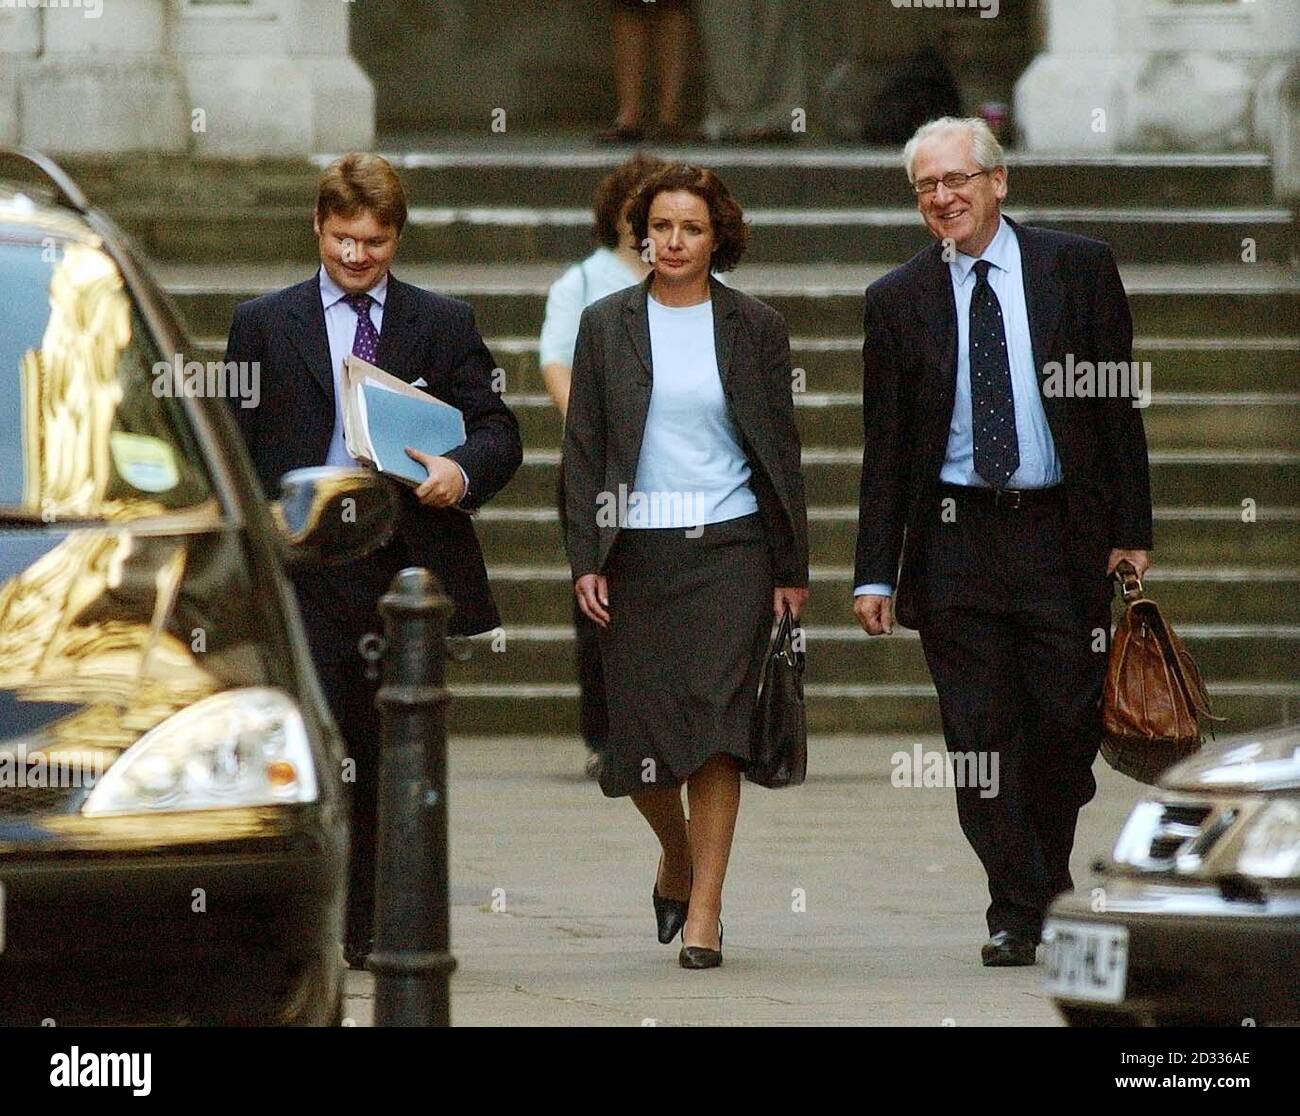 Chief press officer for the Ministry of Defence, Kate Wilson departs from the High Court in central London, after giving evidence to The Hutton Inquiry, into the death of weapons inspector Dr David Kelly. During the inquest Ms Wilson, told Mr Dingemans that she had been in the position since July 2002 but had worked in the MoD press office between 1996 and 2000. She said she spoke to BBC Journalist Mr Andrew Gilligan, on May 28 around 7.30pm and said she had known him all the years she had been a press officer. 31/10/2003: Ministry of Defence chief press officer Kate Wilson becomes an OBE. Stock Photo